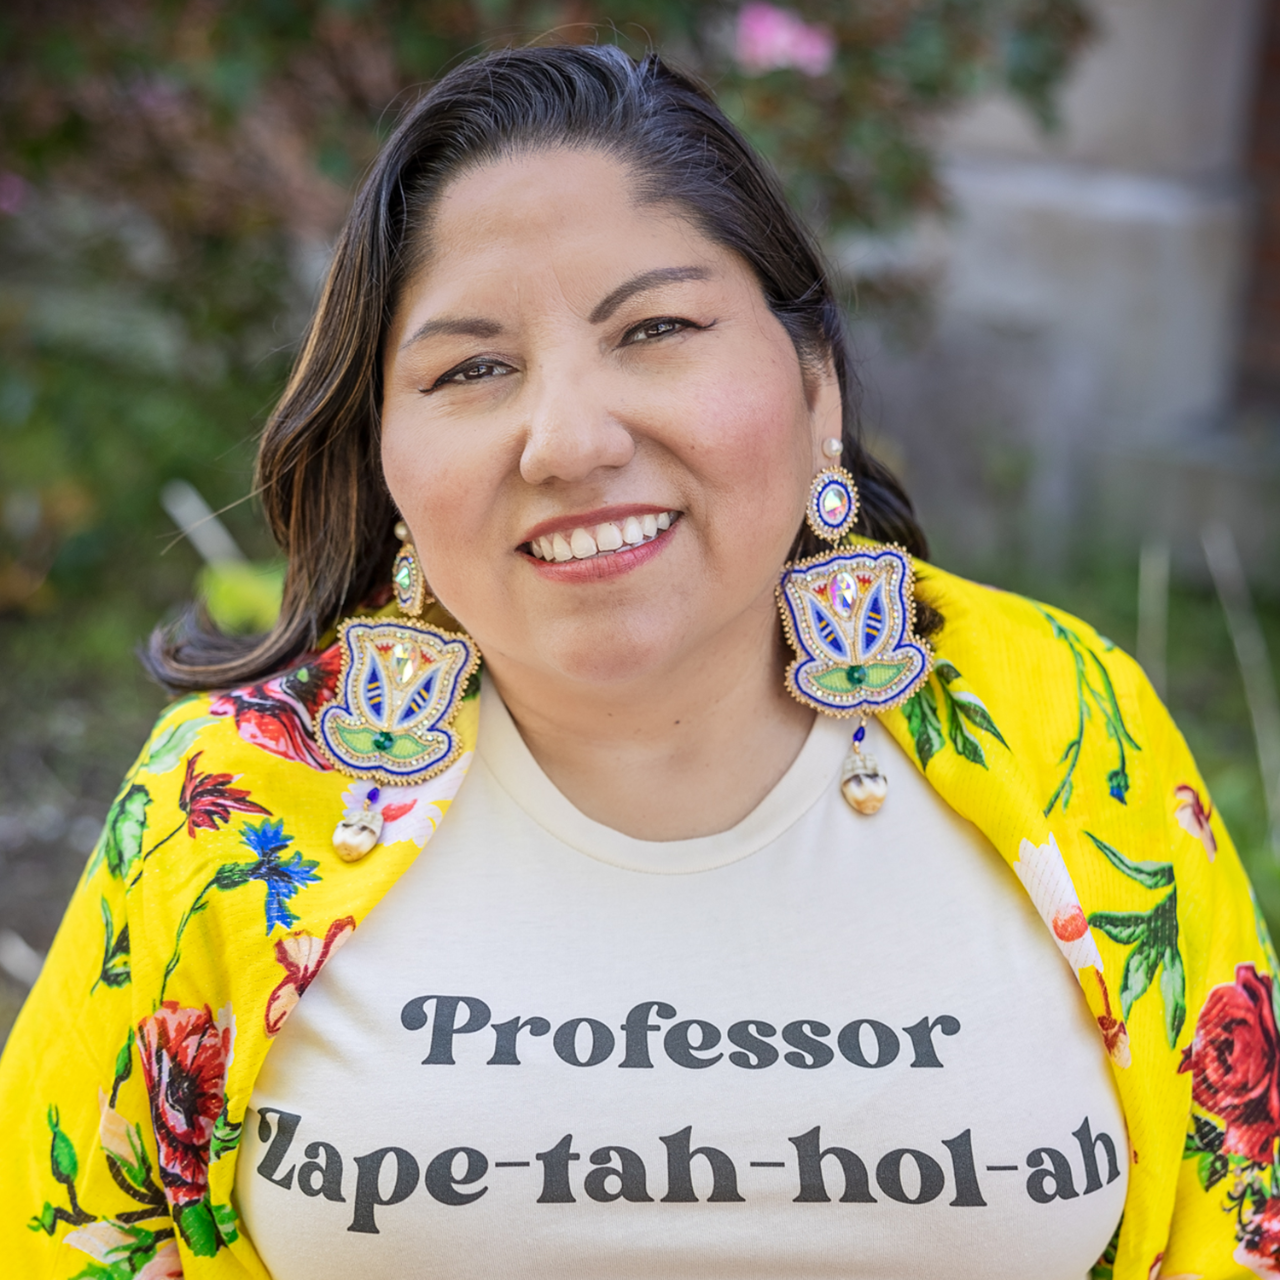 woman in bright yellow shirt with native design earings wearing a shirt that says Professor Zape-tah-hol-ah